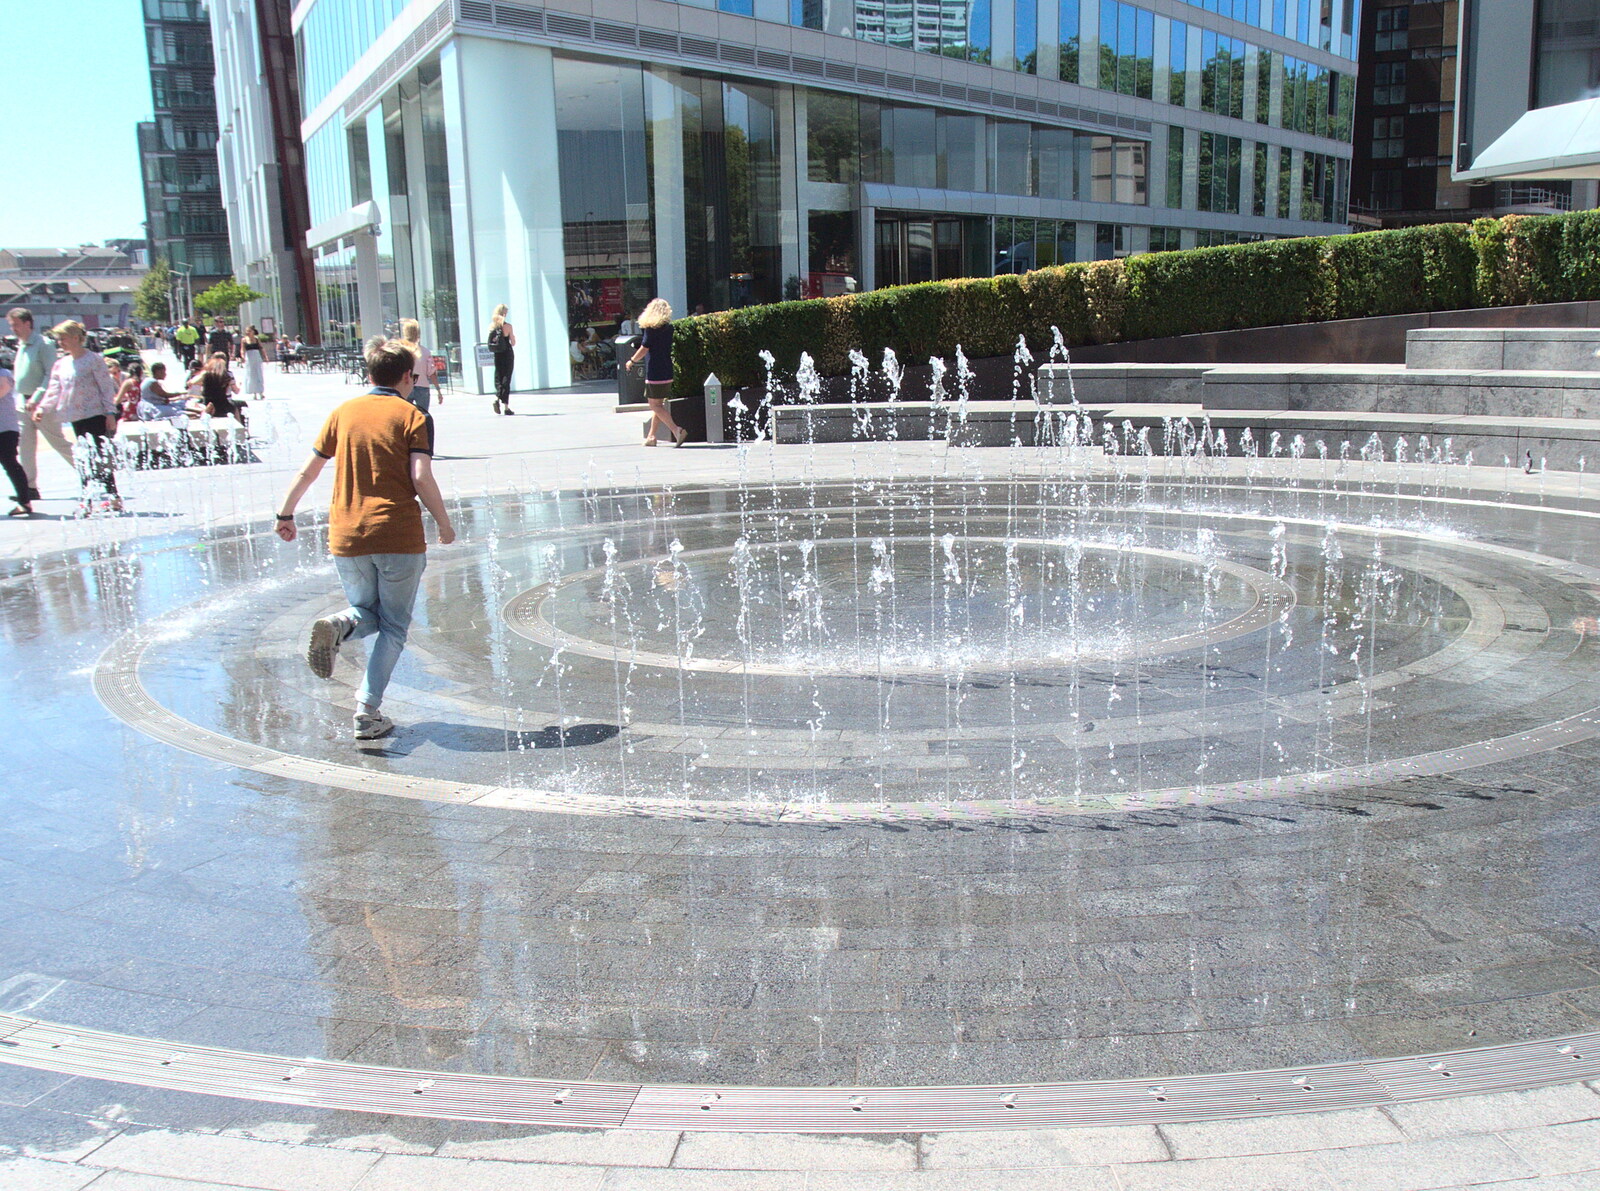 Jess runs through the fountain from A SwiftKey Lunch, Porchester Place,  Edgware Road, London - 27th June 2018